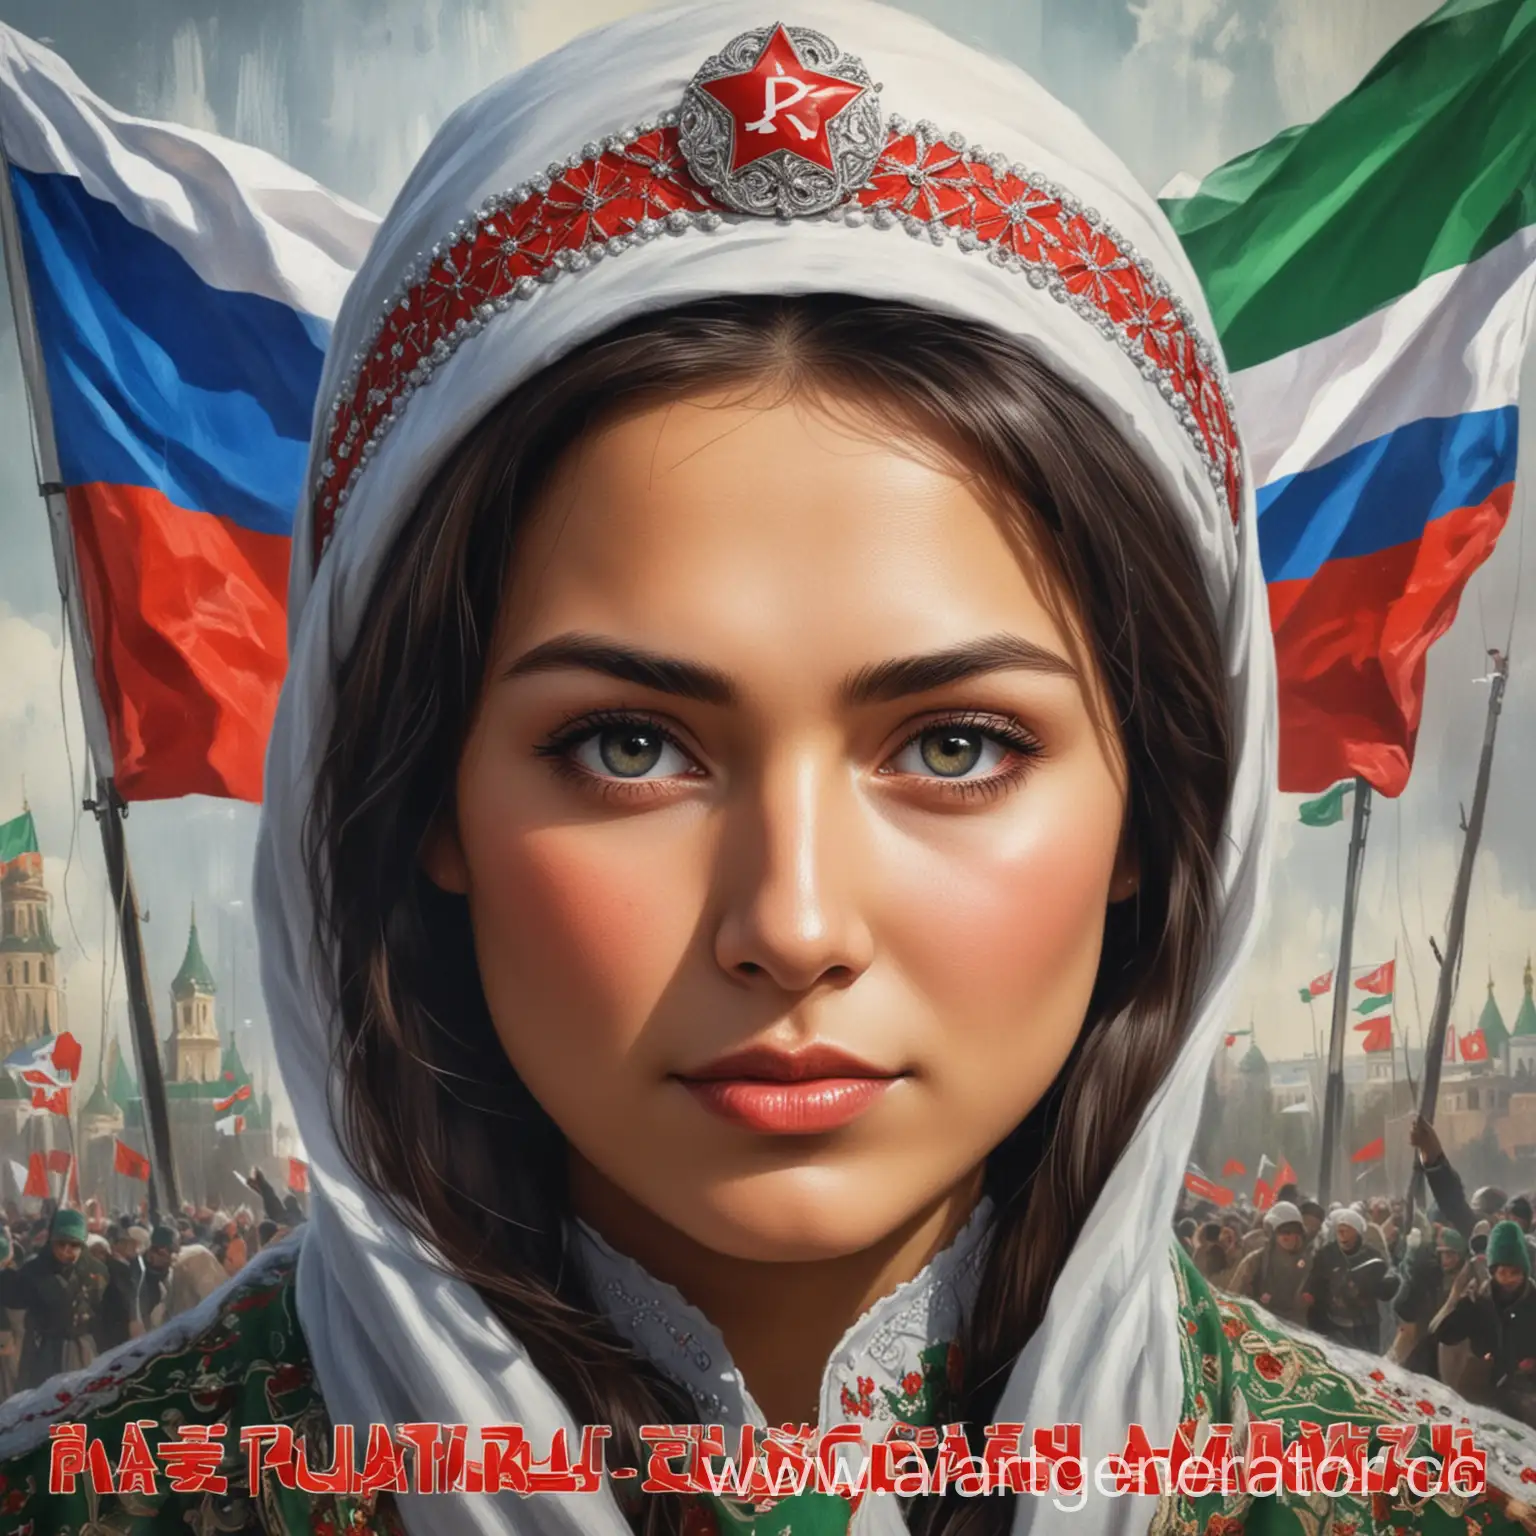 Patriotic-Song-I-Am-a-Russian-Woman-Poster-Featuring-Tatarstans-Cultural-Heritage